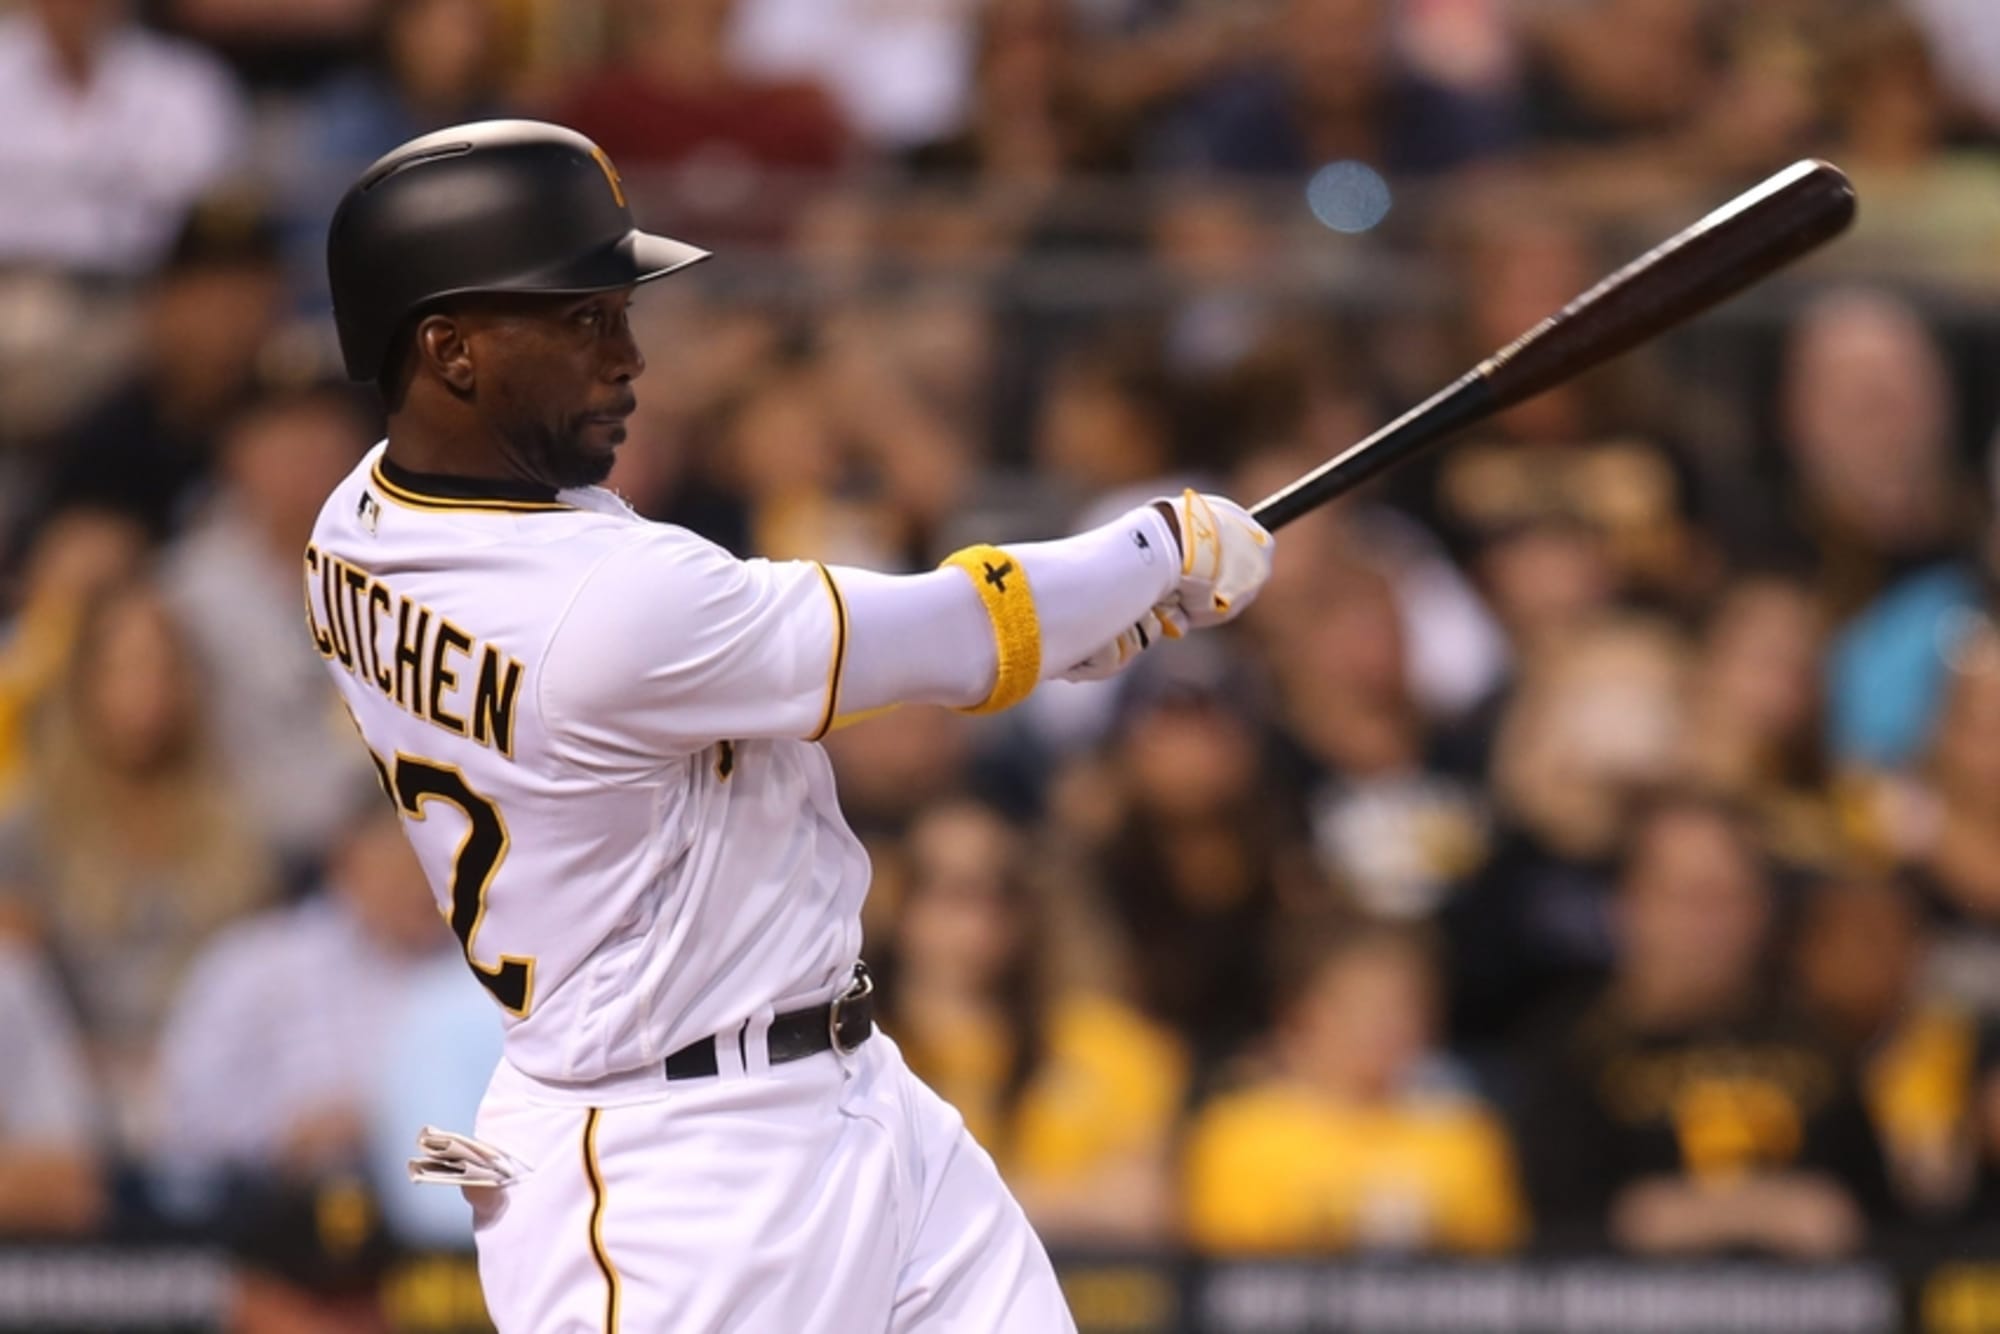 Pirates take out struggling Andrew McCutchen in double-switch - NBC Sports